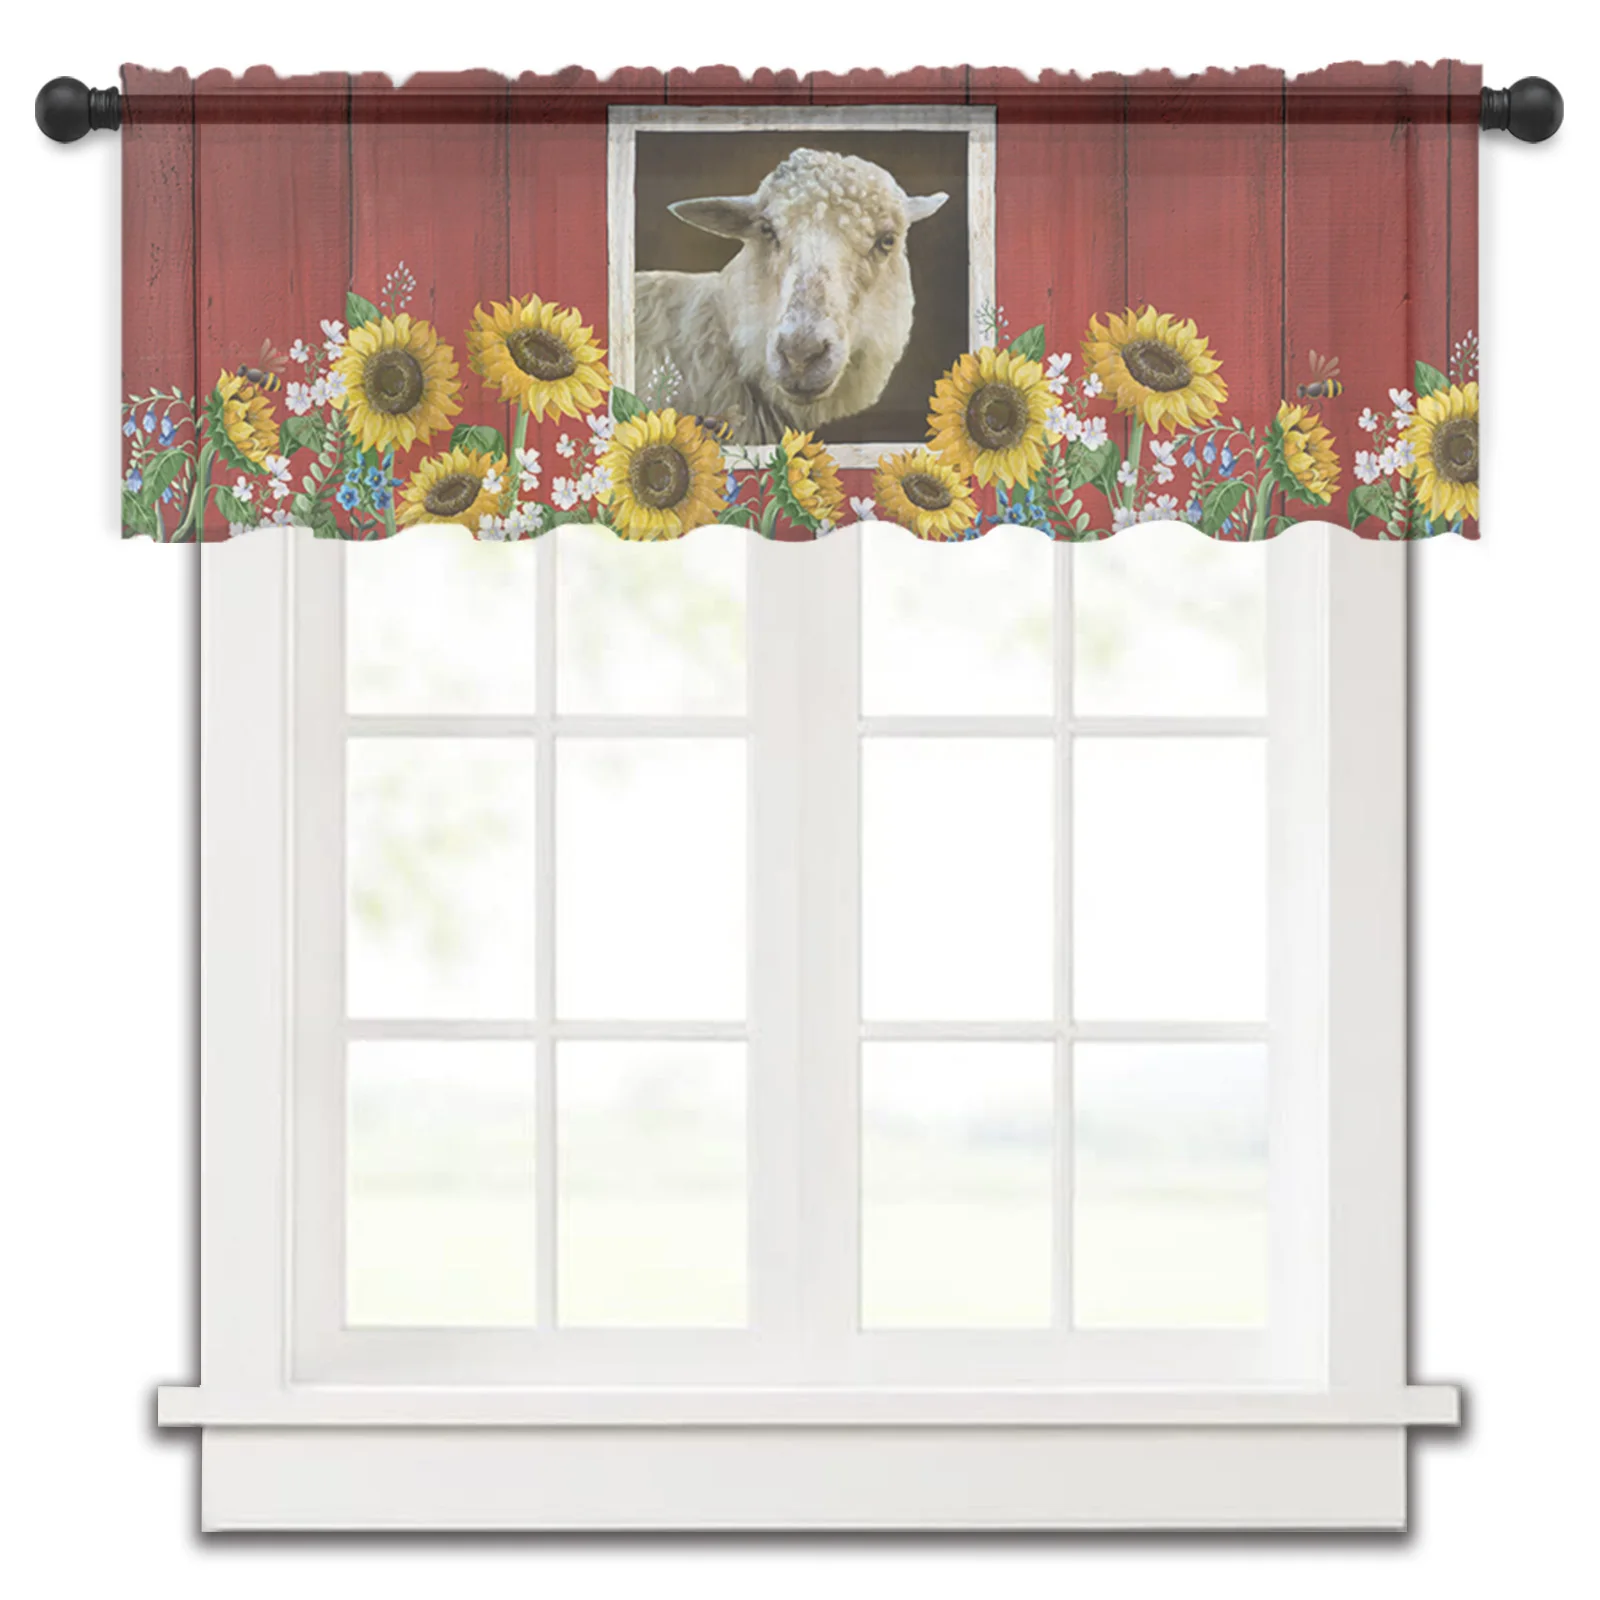 

Sheep Sunflower Farm Barn Kitchen Small Window Curtain Tulle Sheer Short Curtain Bedroom Living Room Home Decor Voile Drapes